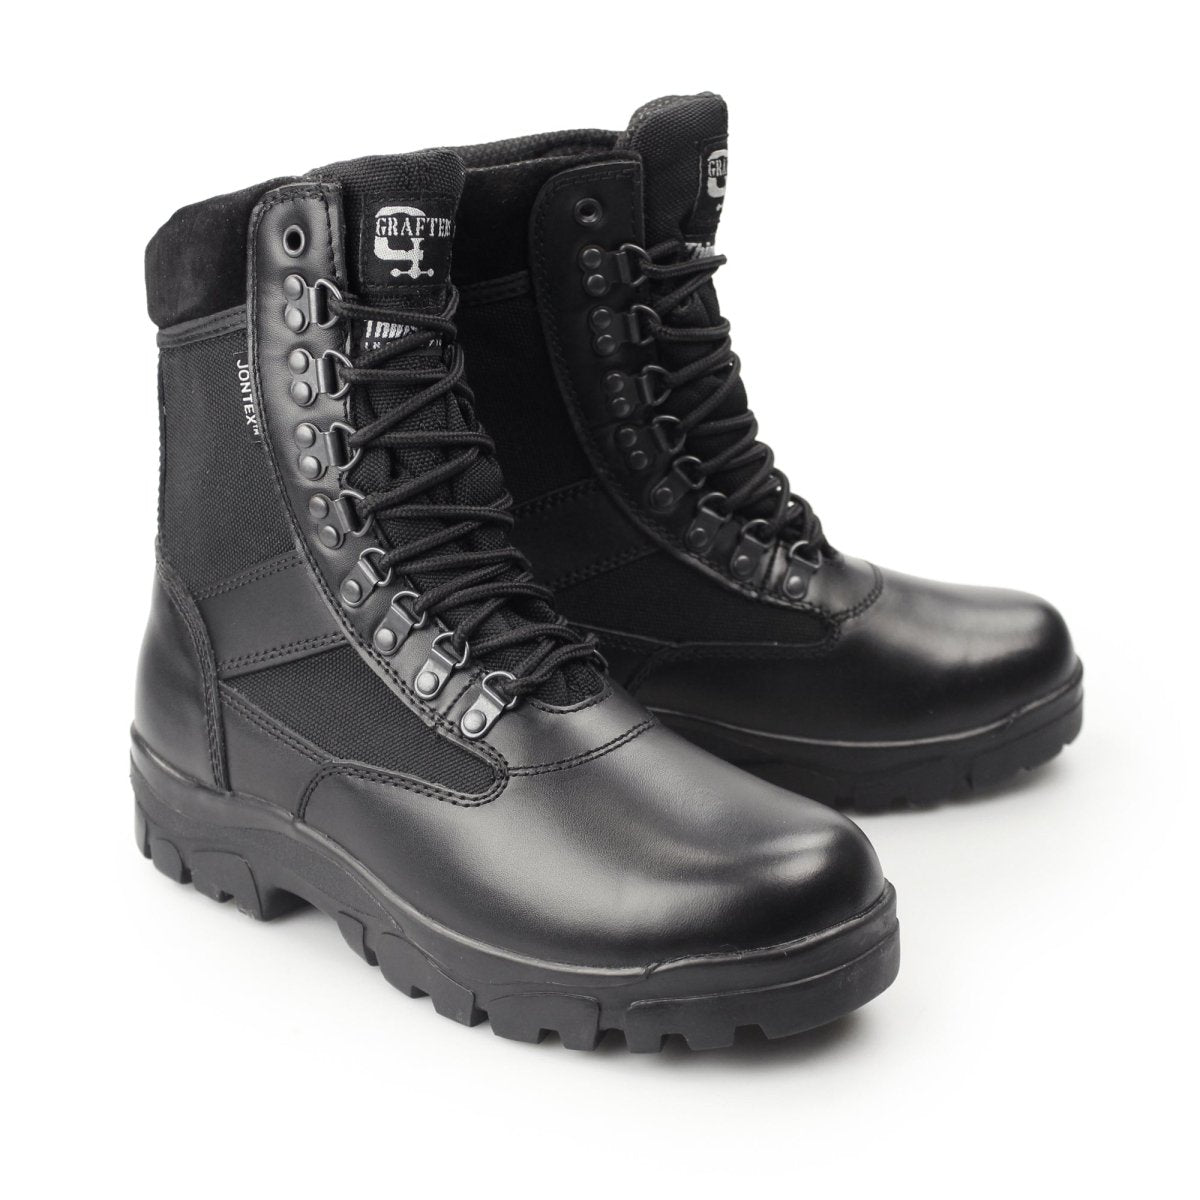 Grafters SNIPER Unisex Leather Work Boots Black M482A - 3 | STB.co.uk